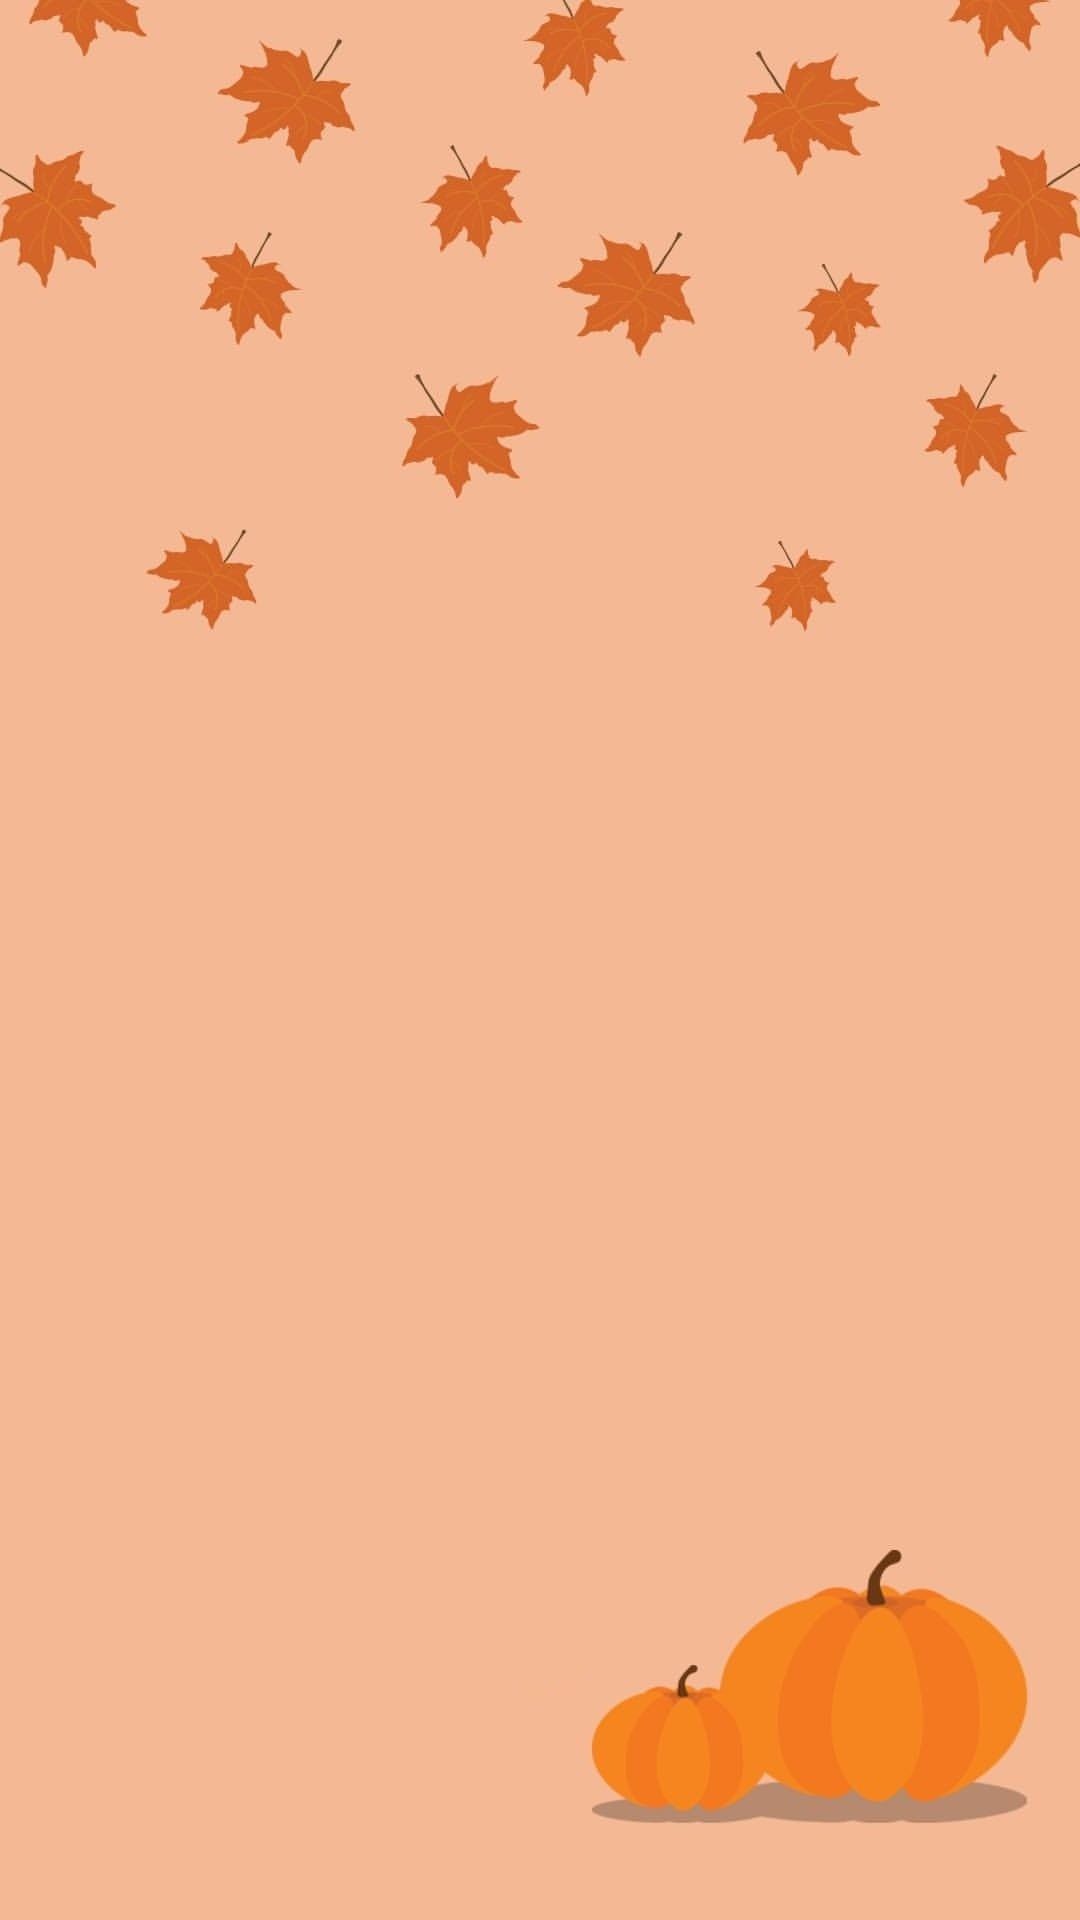 A pumpkin and some leaves on an orange background - Fall iPhone